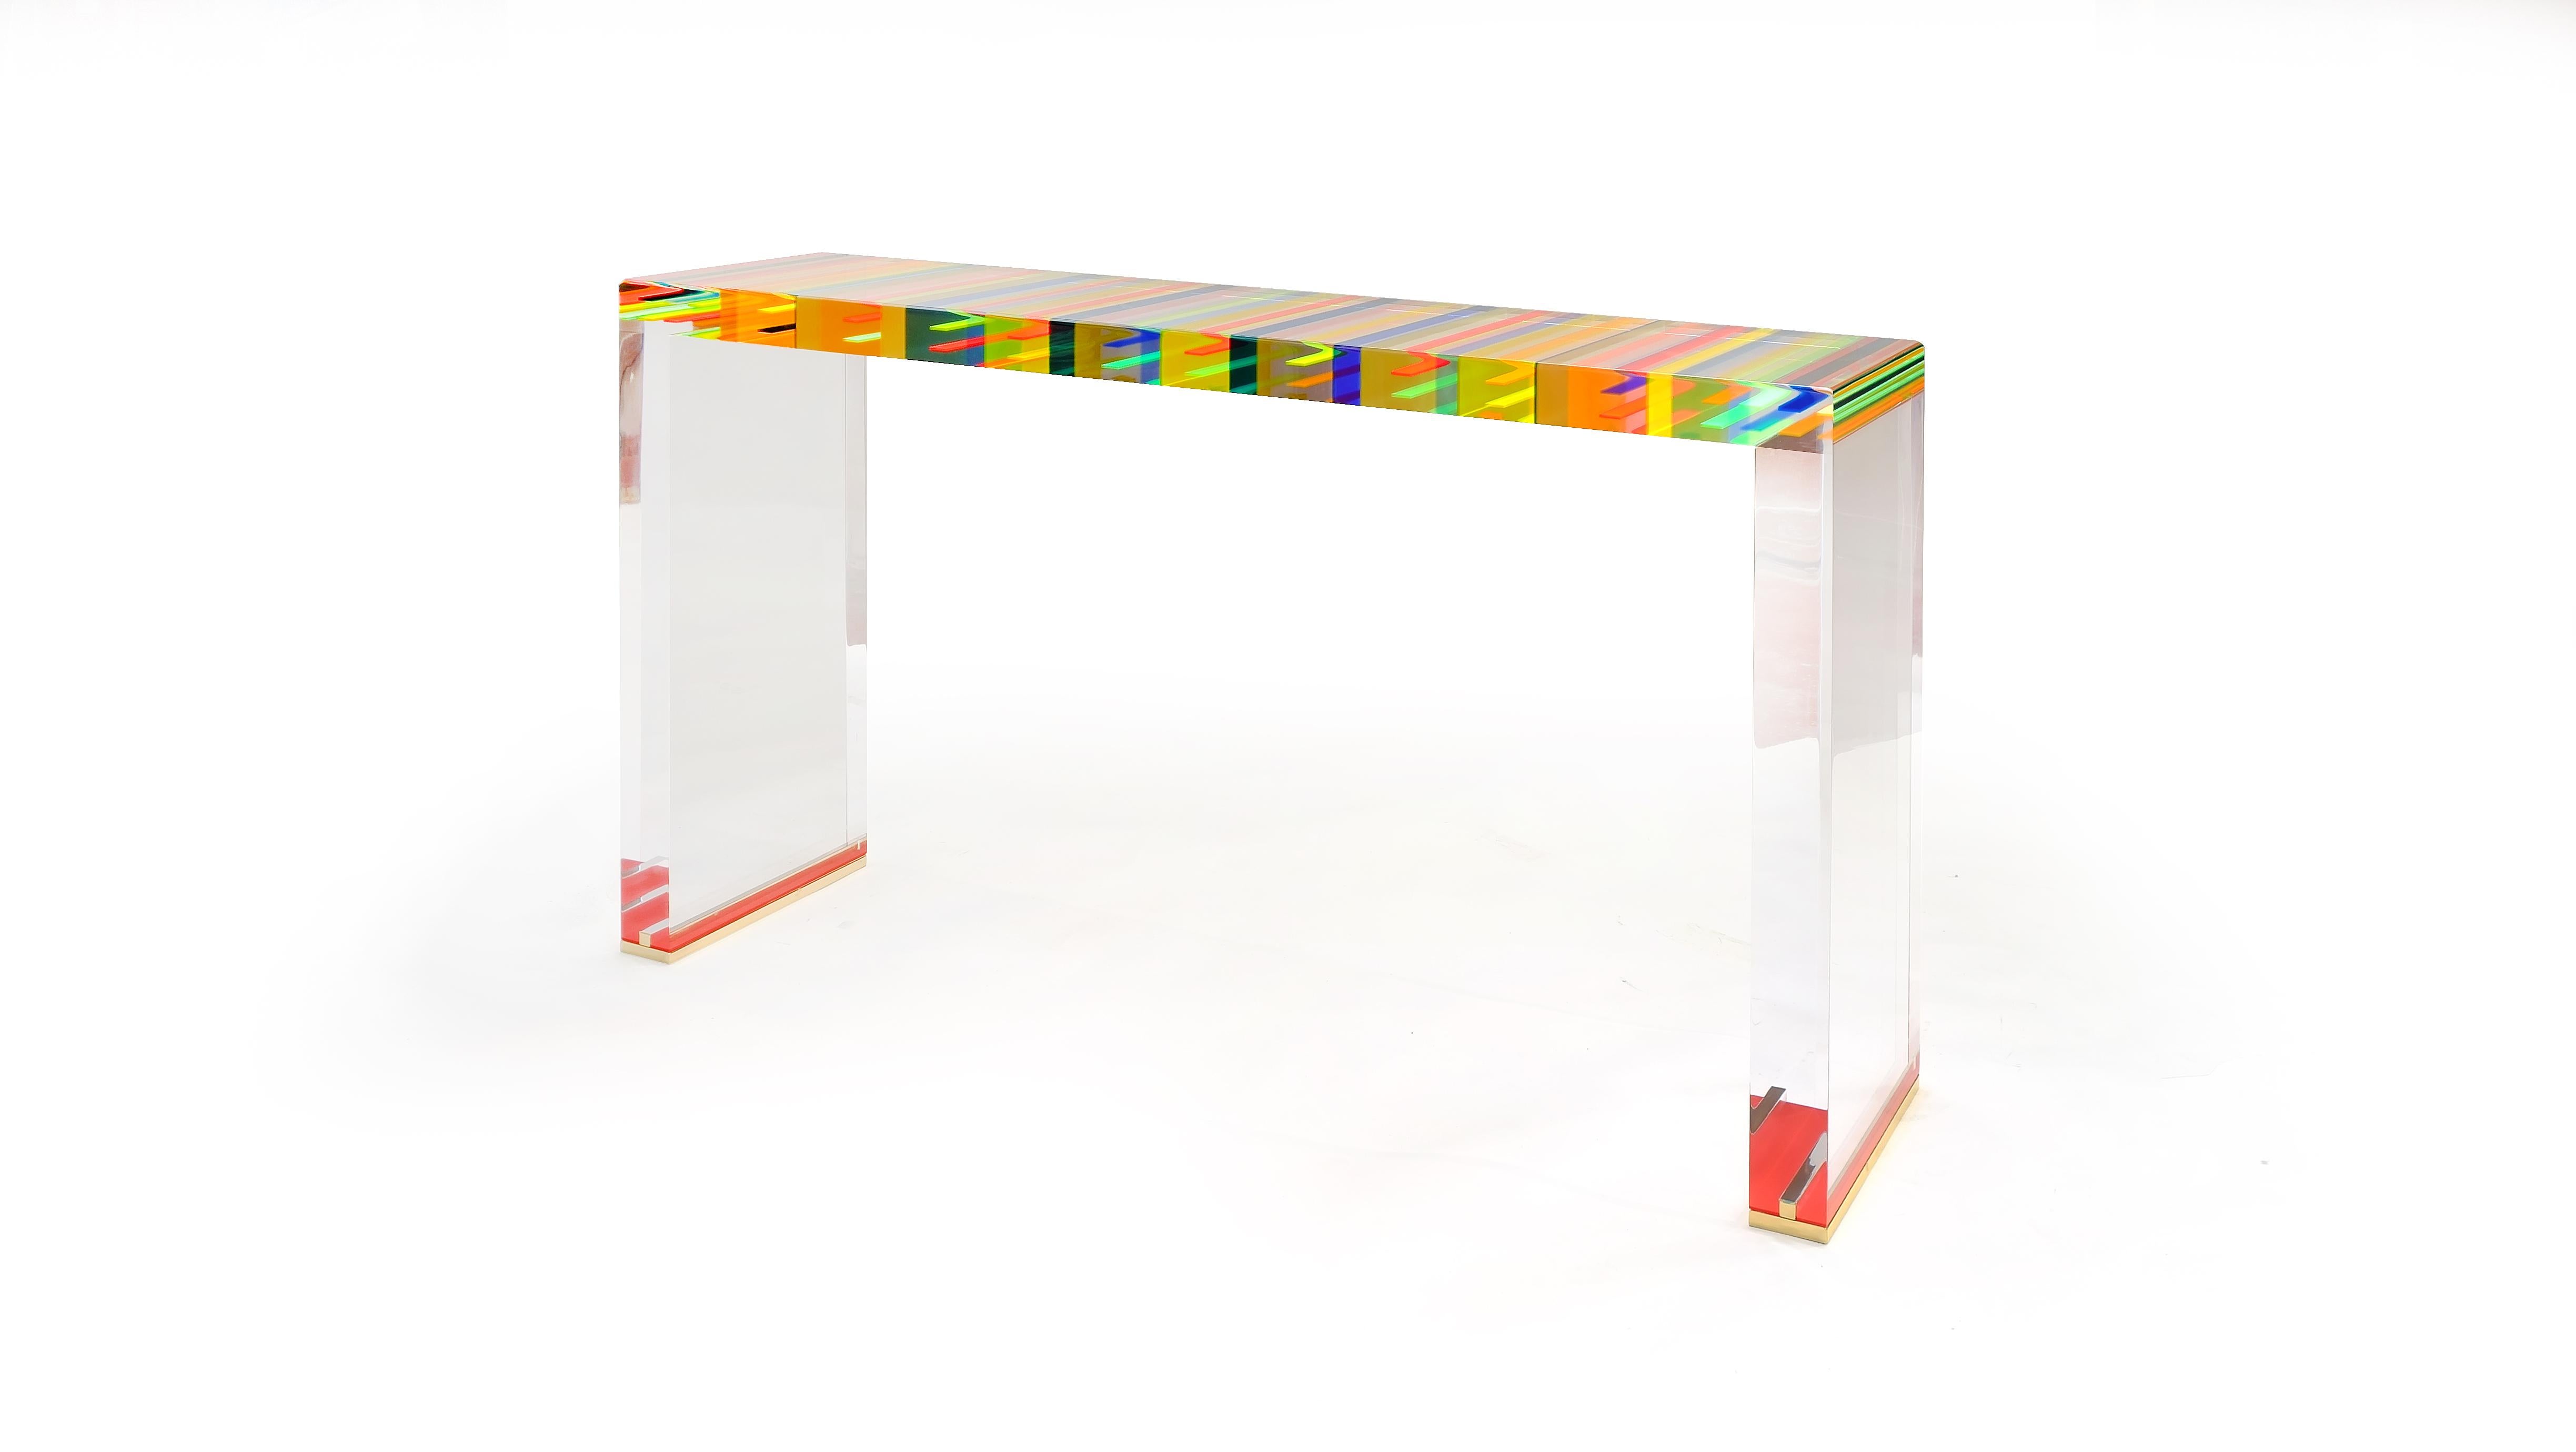 DNA model console in colored plexiglass.
A series of unique pieces designed by Studio Superego for Superego Editions.

Biography
Superego editions was born in 2006, performing a constant activity of research in decorative arts by offering both